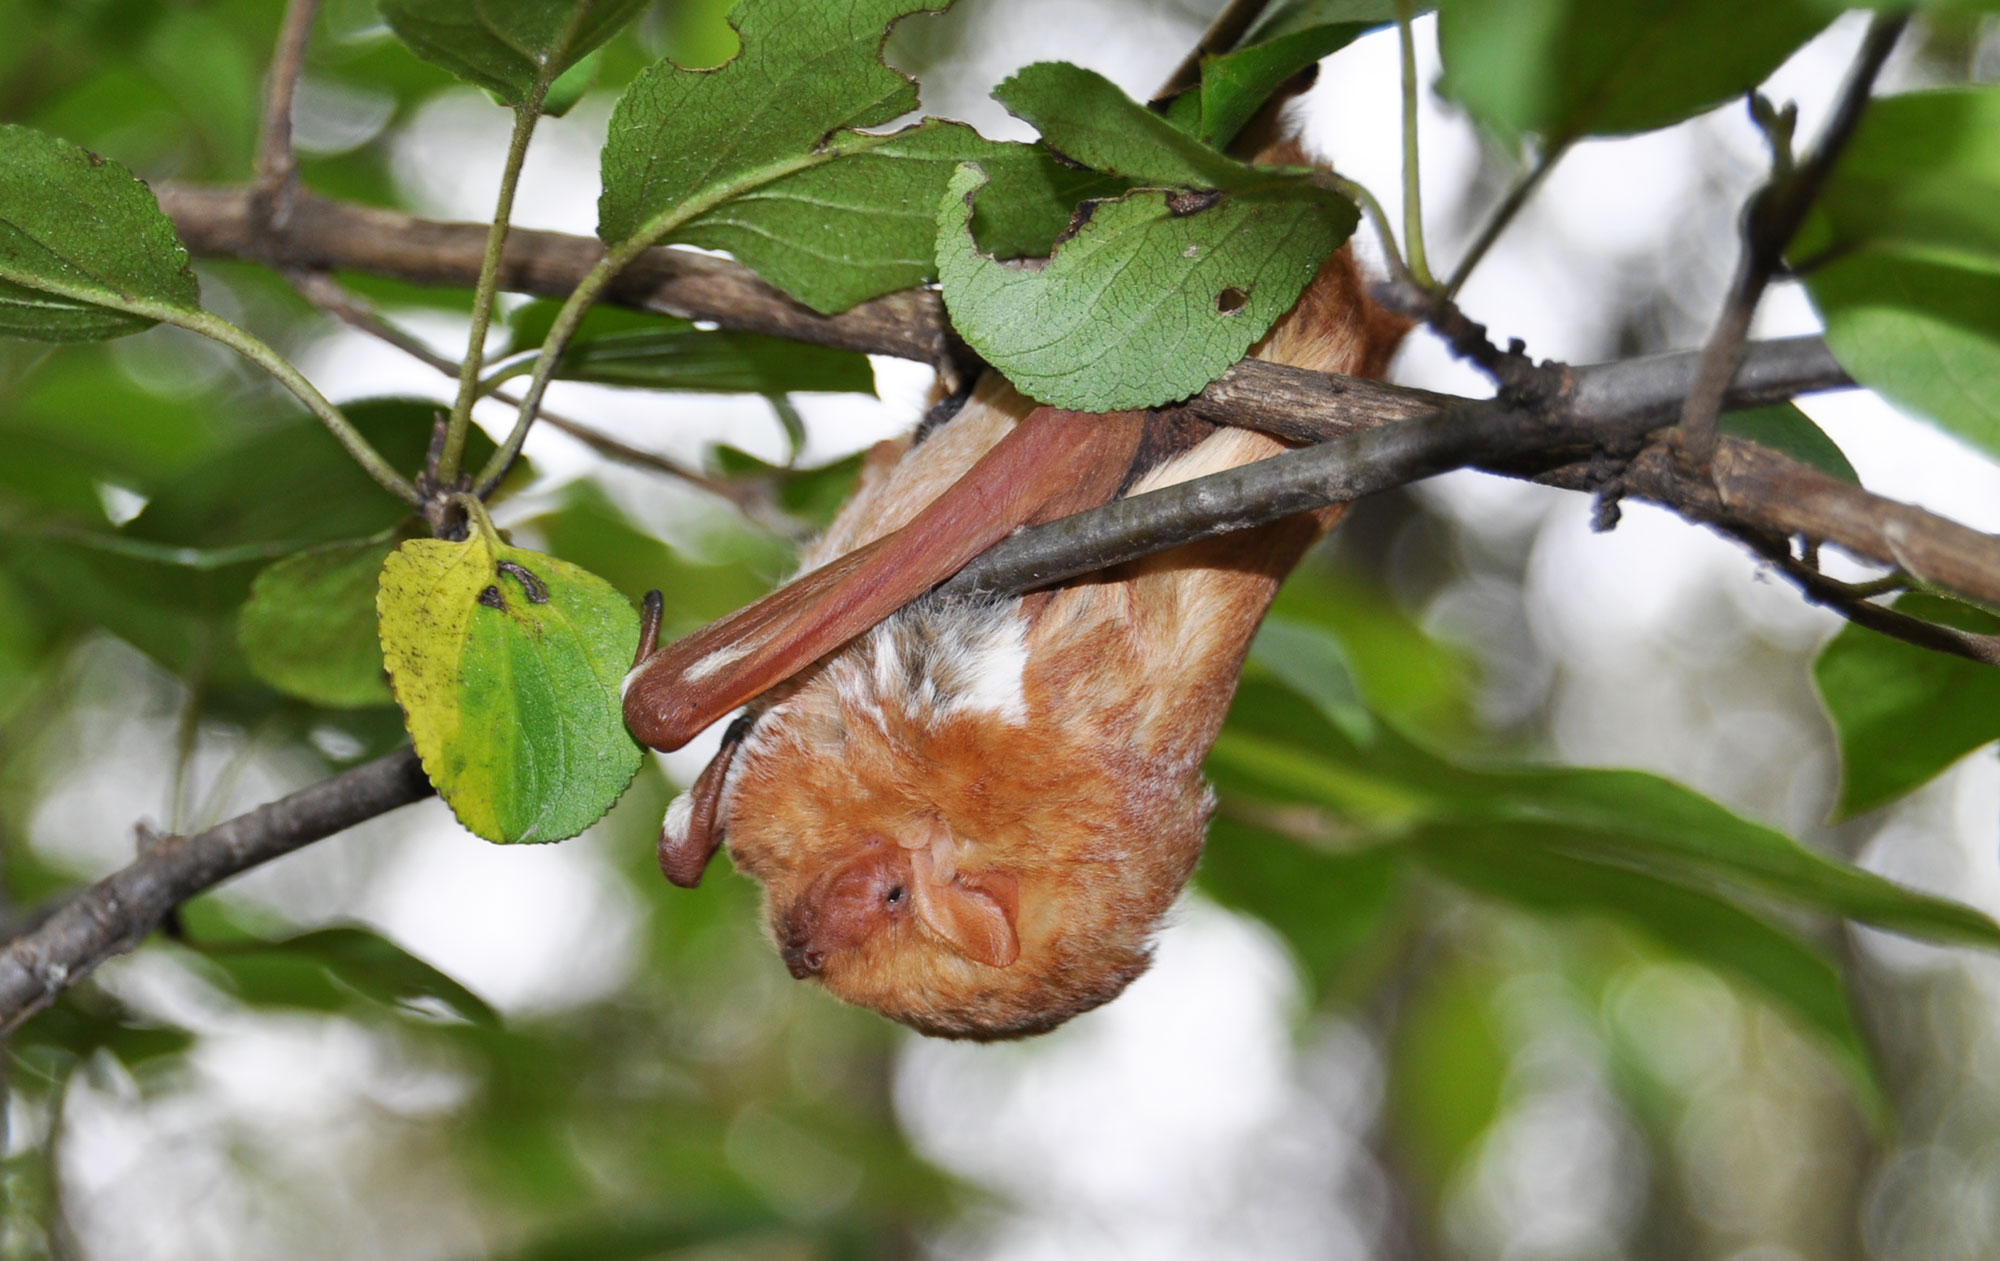 An eastern red bat in a tree.